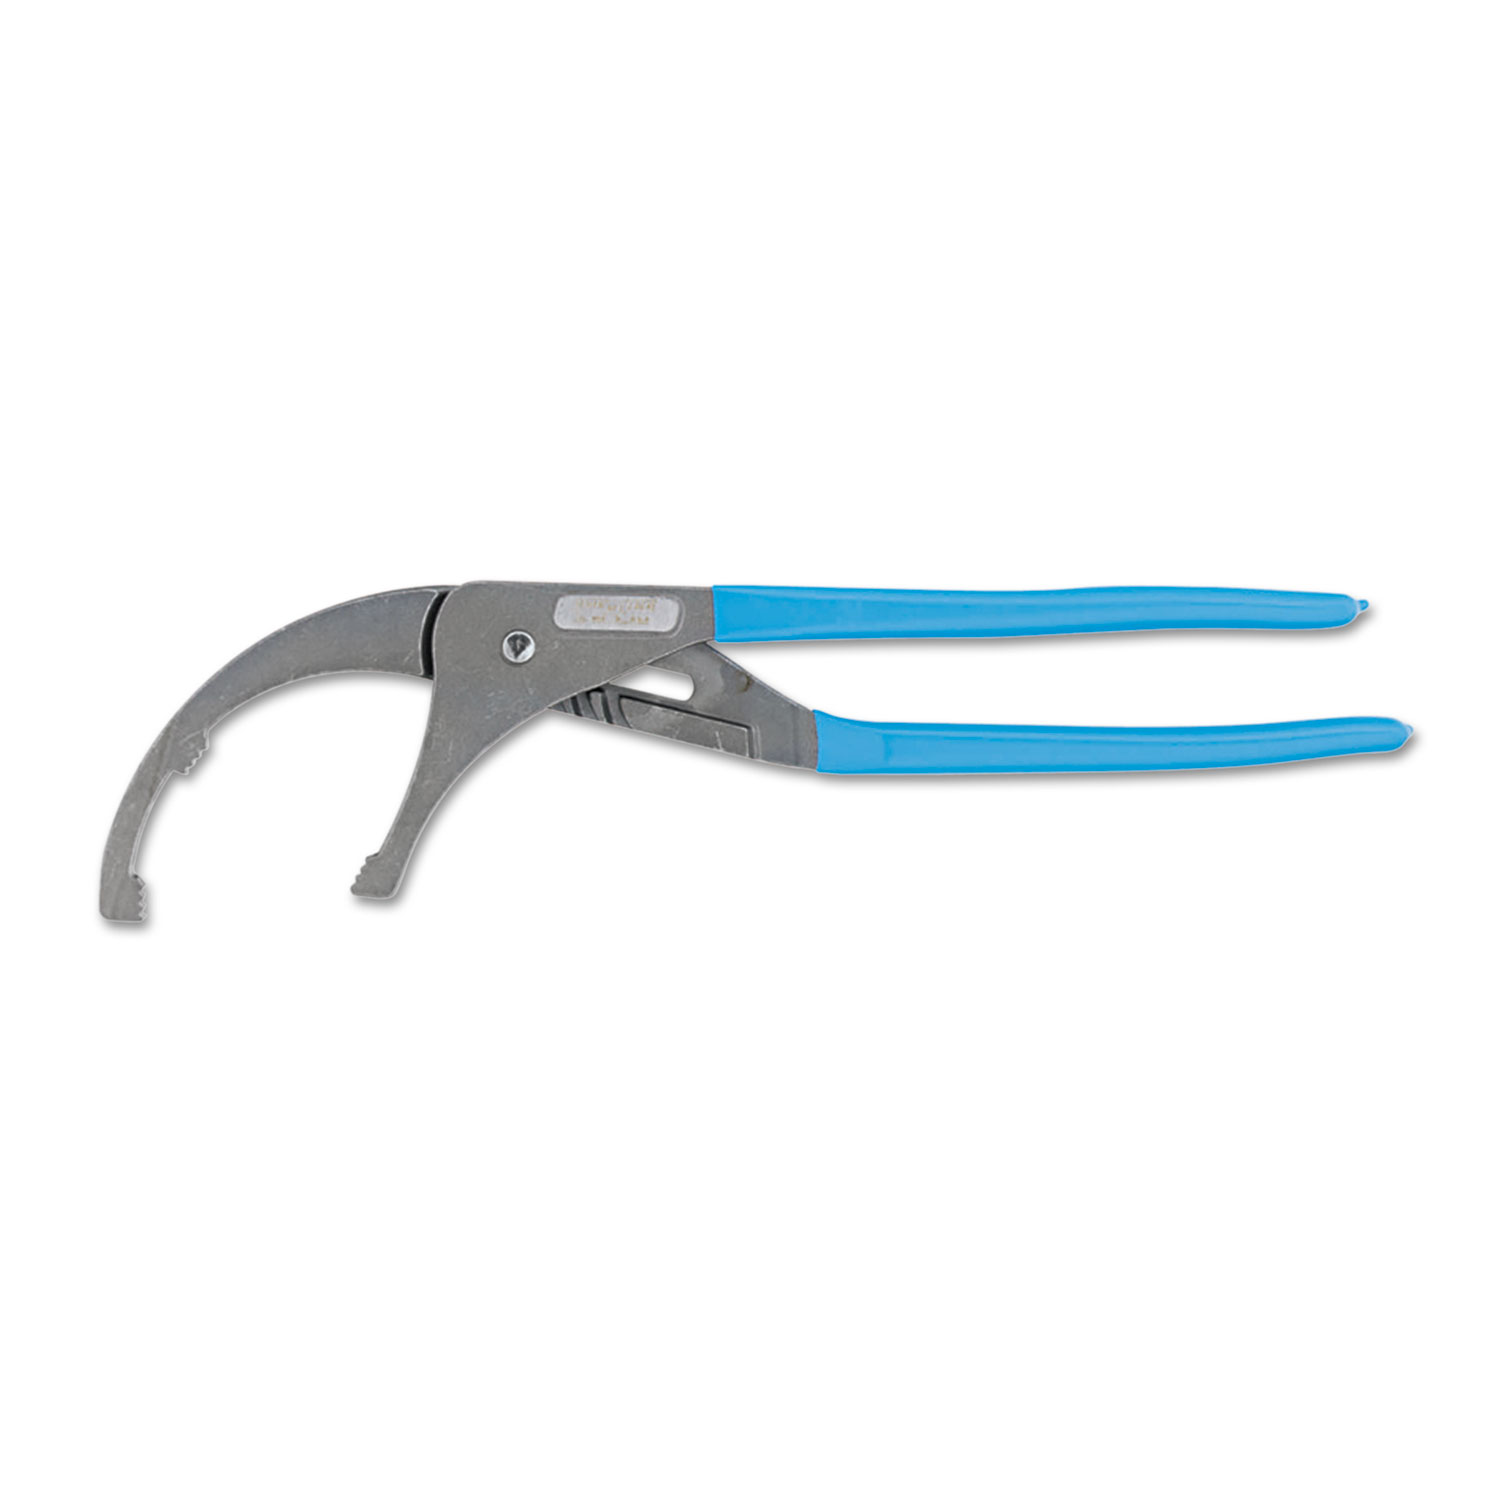 215 Oil-Filter Pliers, 15 1/2 Tool Length, 2 1/2 to 5 1/2 Opening Size